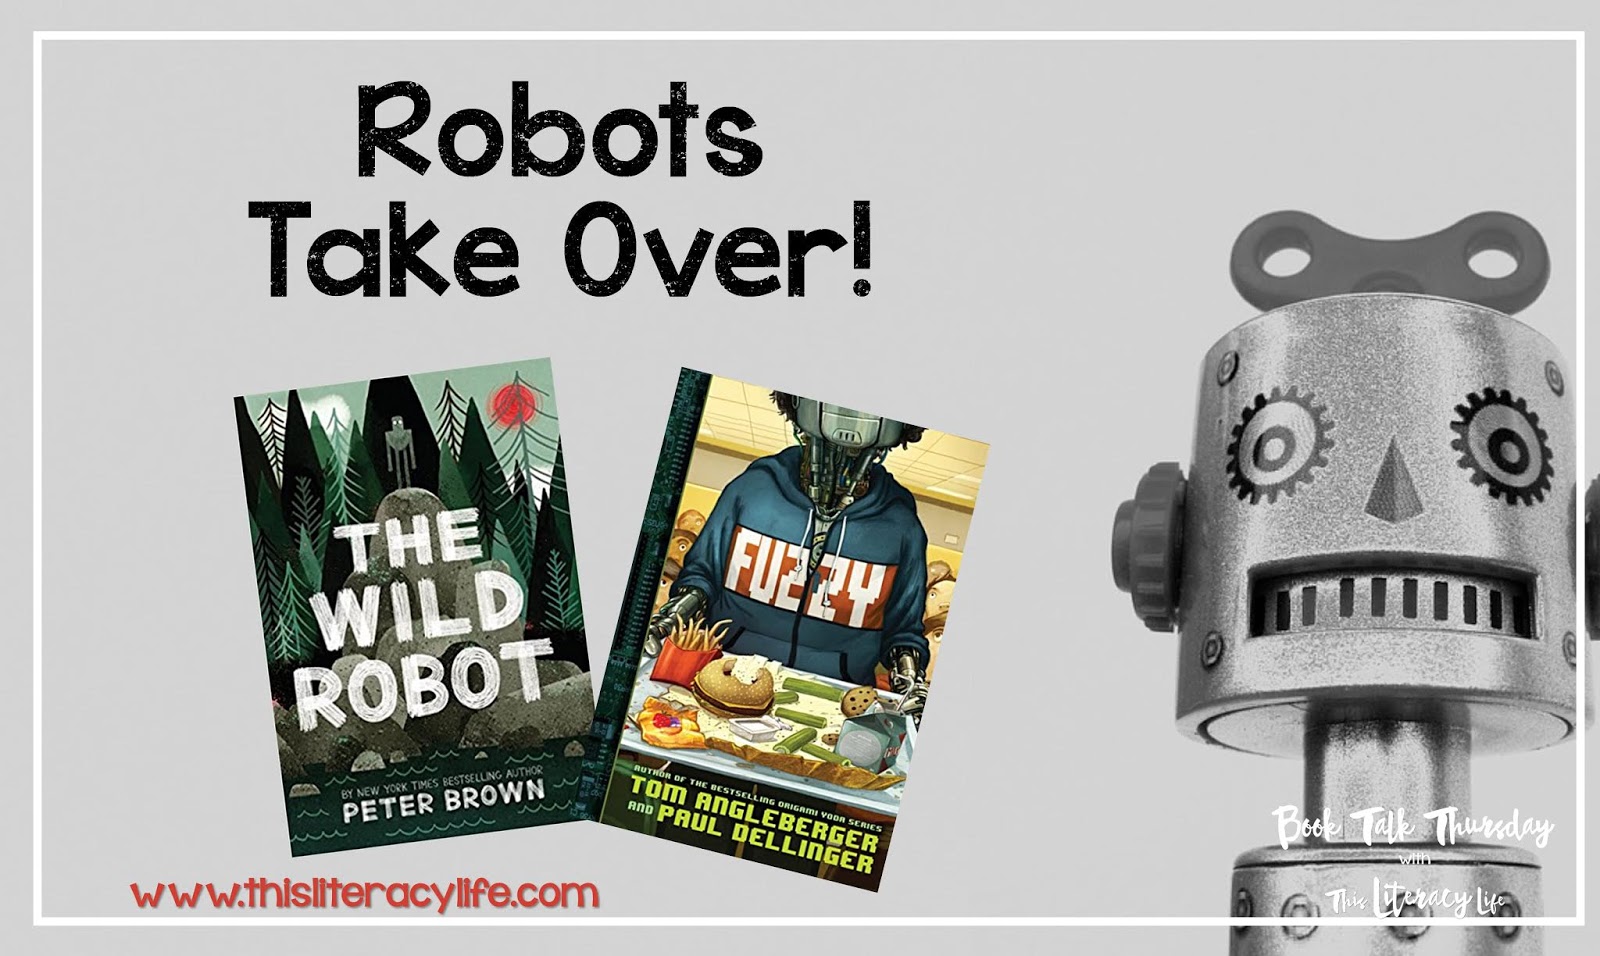 Two books on the Virginia Readers' Choice lists are similar. These robot stories will have us all thinking about what life is like for those who are different from each of us.